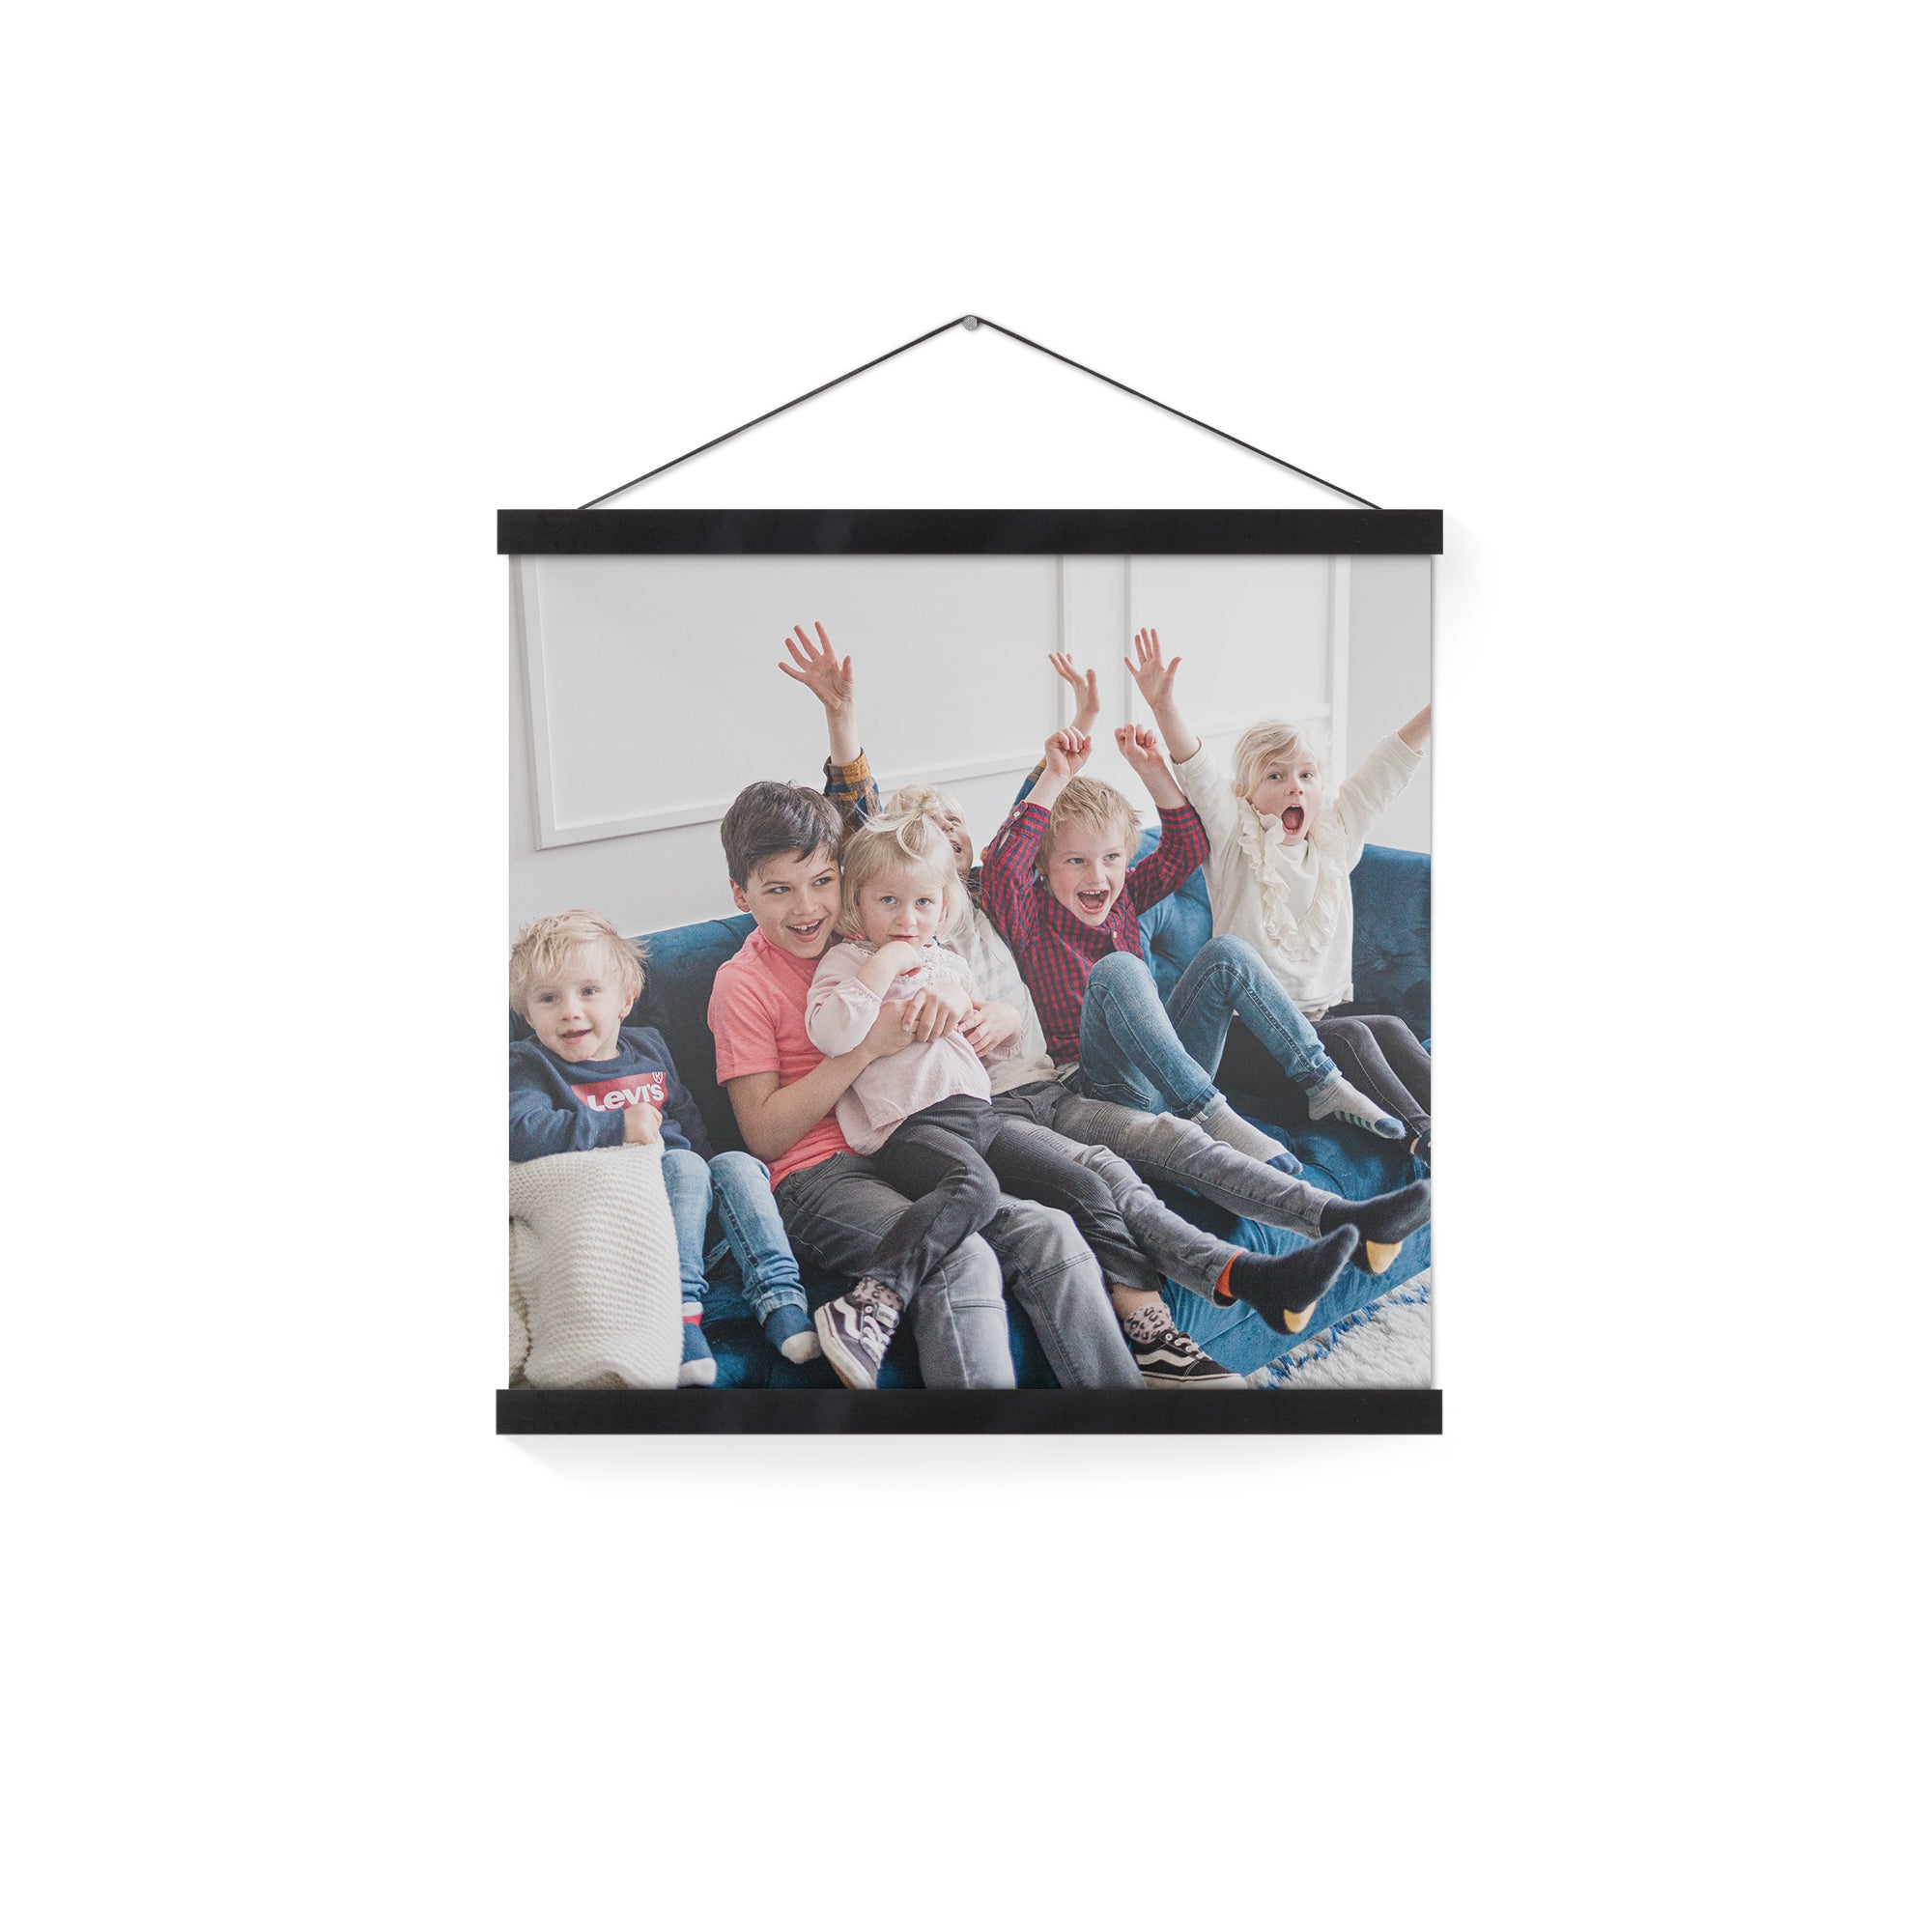 Personalised poster with black hanger - 20x20